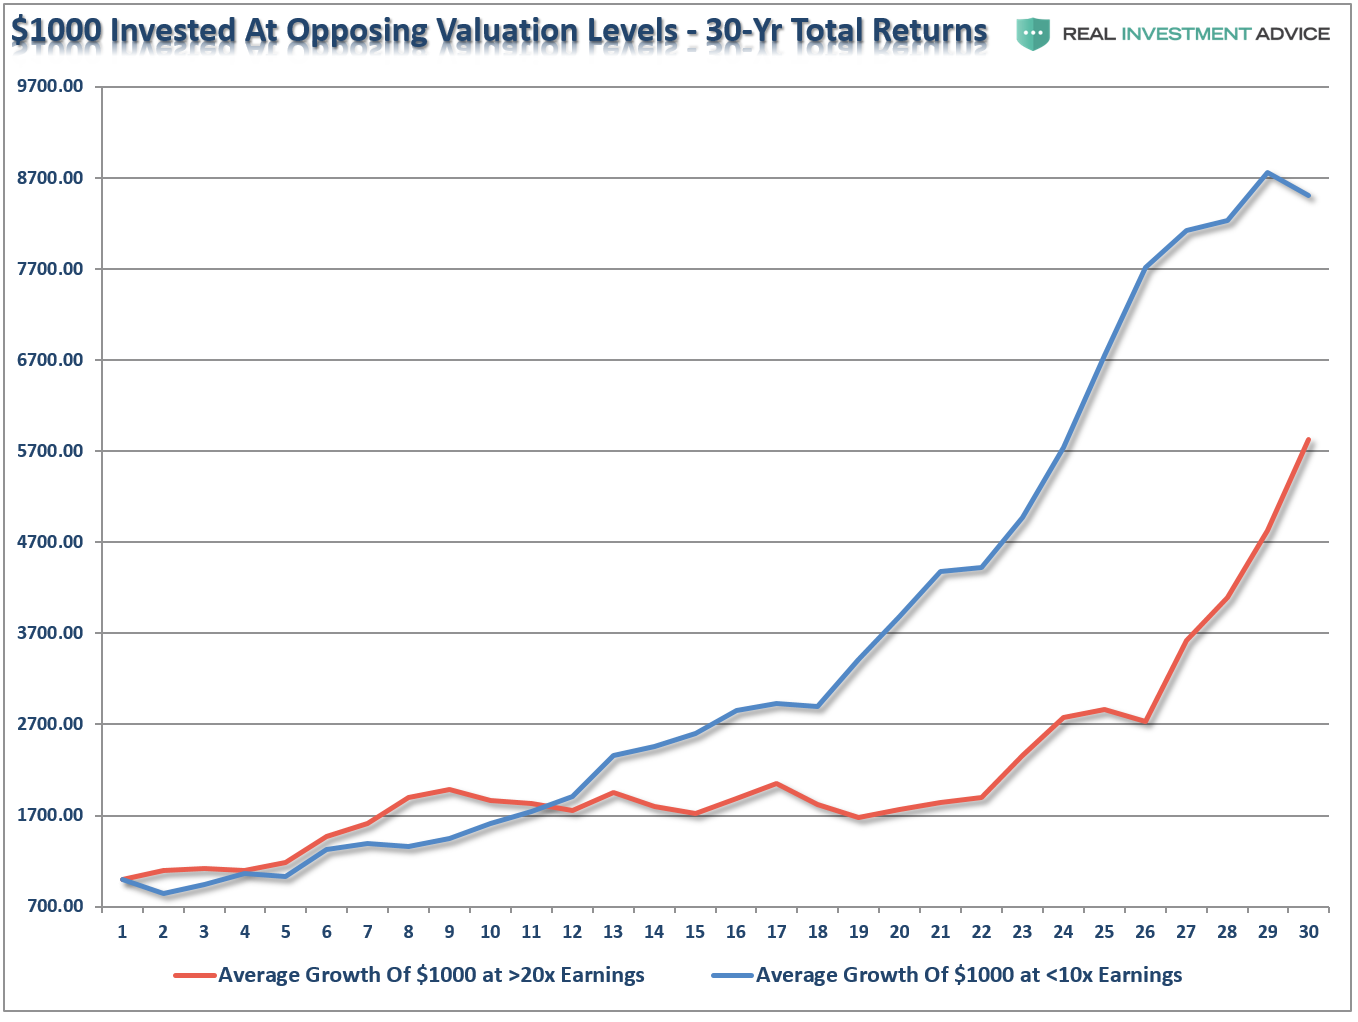 $1000 Invested at Opposing Valuation Levels 30-Y Total Returns